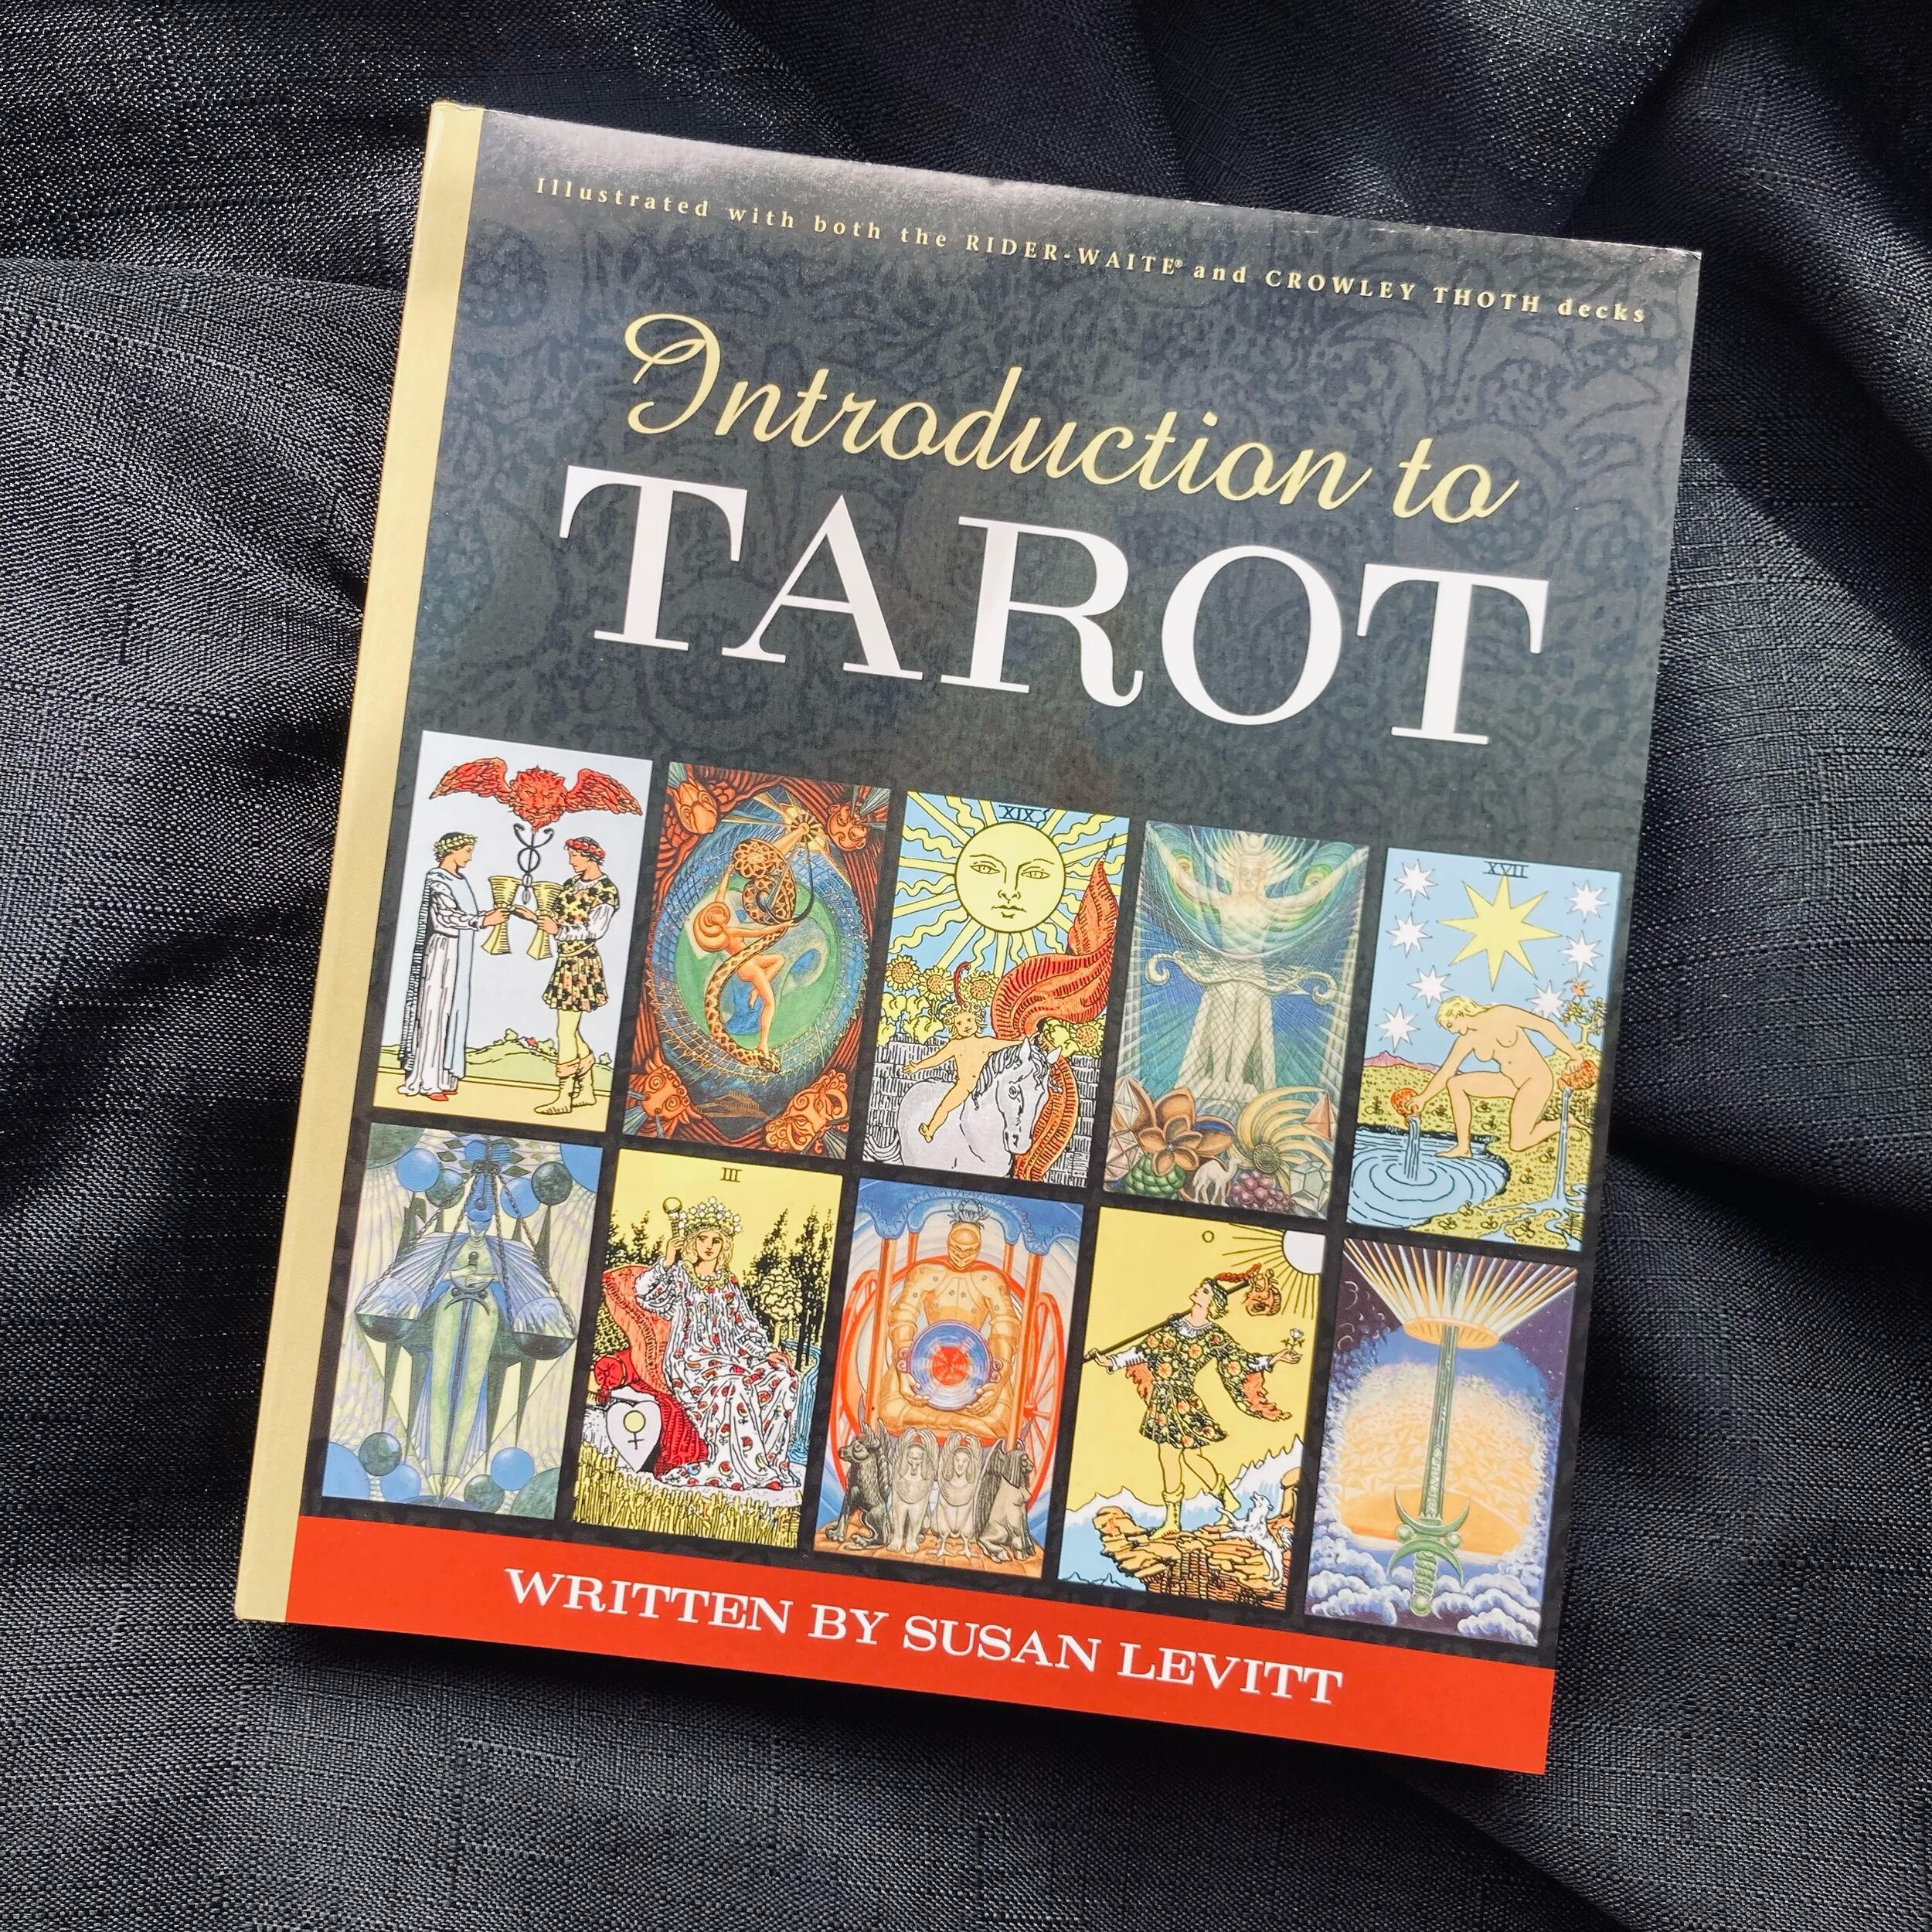 IN THE SHOP: Introduction to Tarot by Susan Levitt
✶ ✶ ✶
This book includes instructions for understanding tarot structure and symbolism, basic and advanced card spreads, numerology, court cards, and other tarot topics.  This is a book that will insp